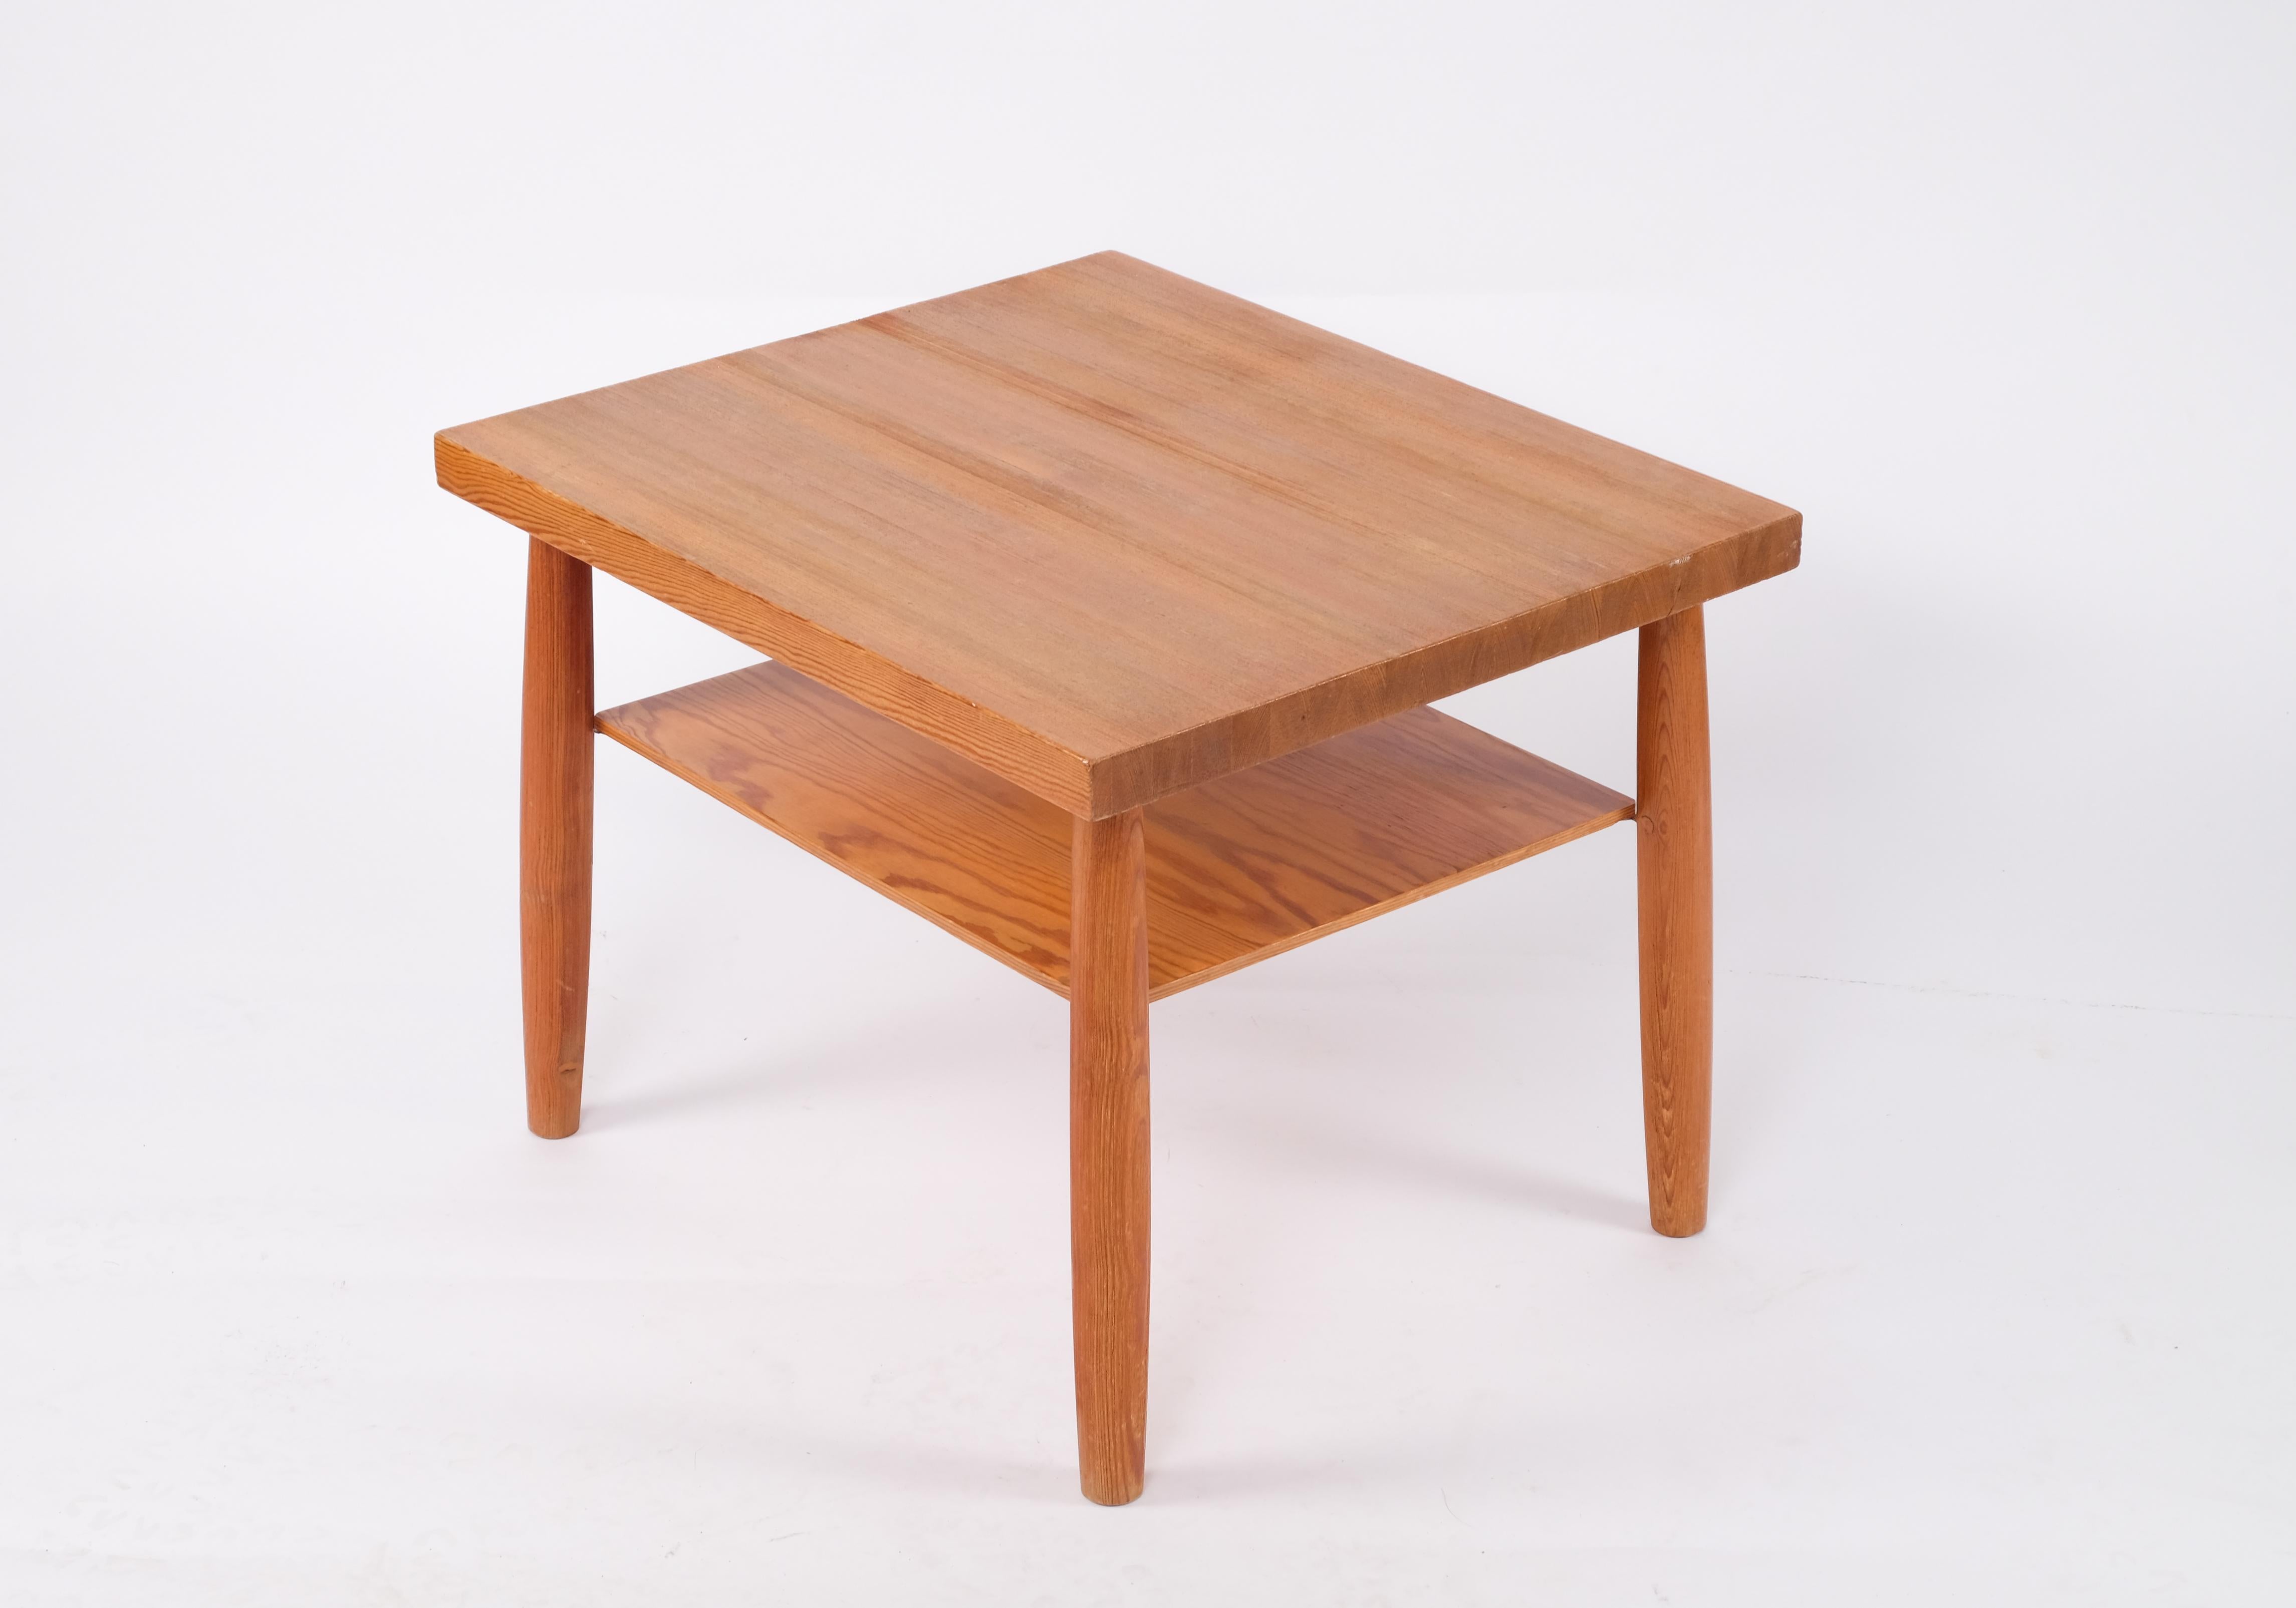 Side table / coffee table in stained pinewood produced by Nordiska Kompaniet, 1940s.
Possibly designed by Axel-Einar Hjorth.